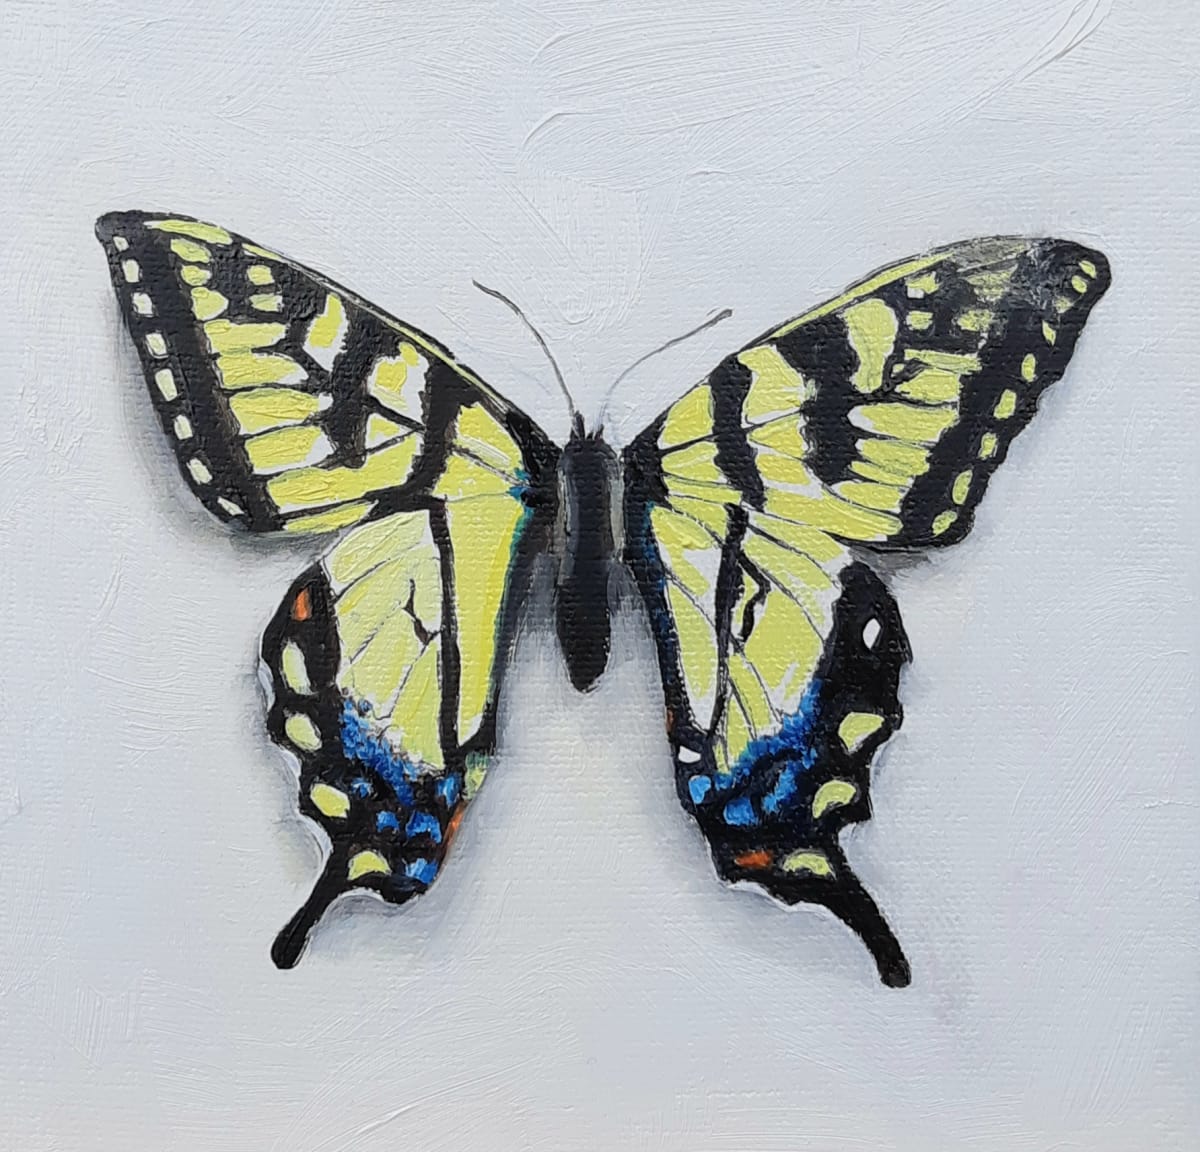 Small Yellow Swallowtail by Catherine Mills  Image: Small Yellow Swallowtail, 6 x 6 inches, oil on wood panel